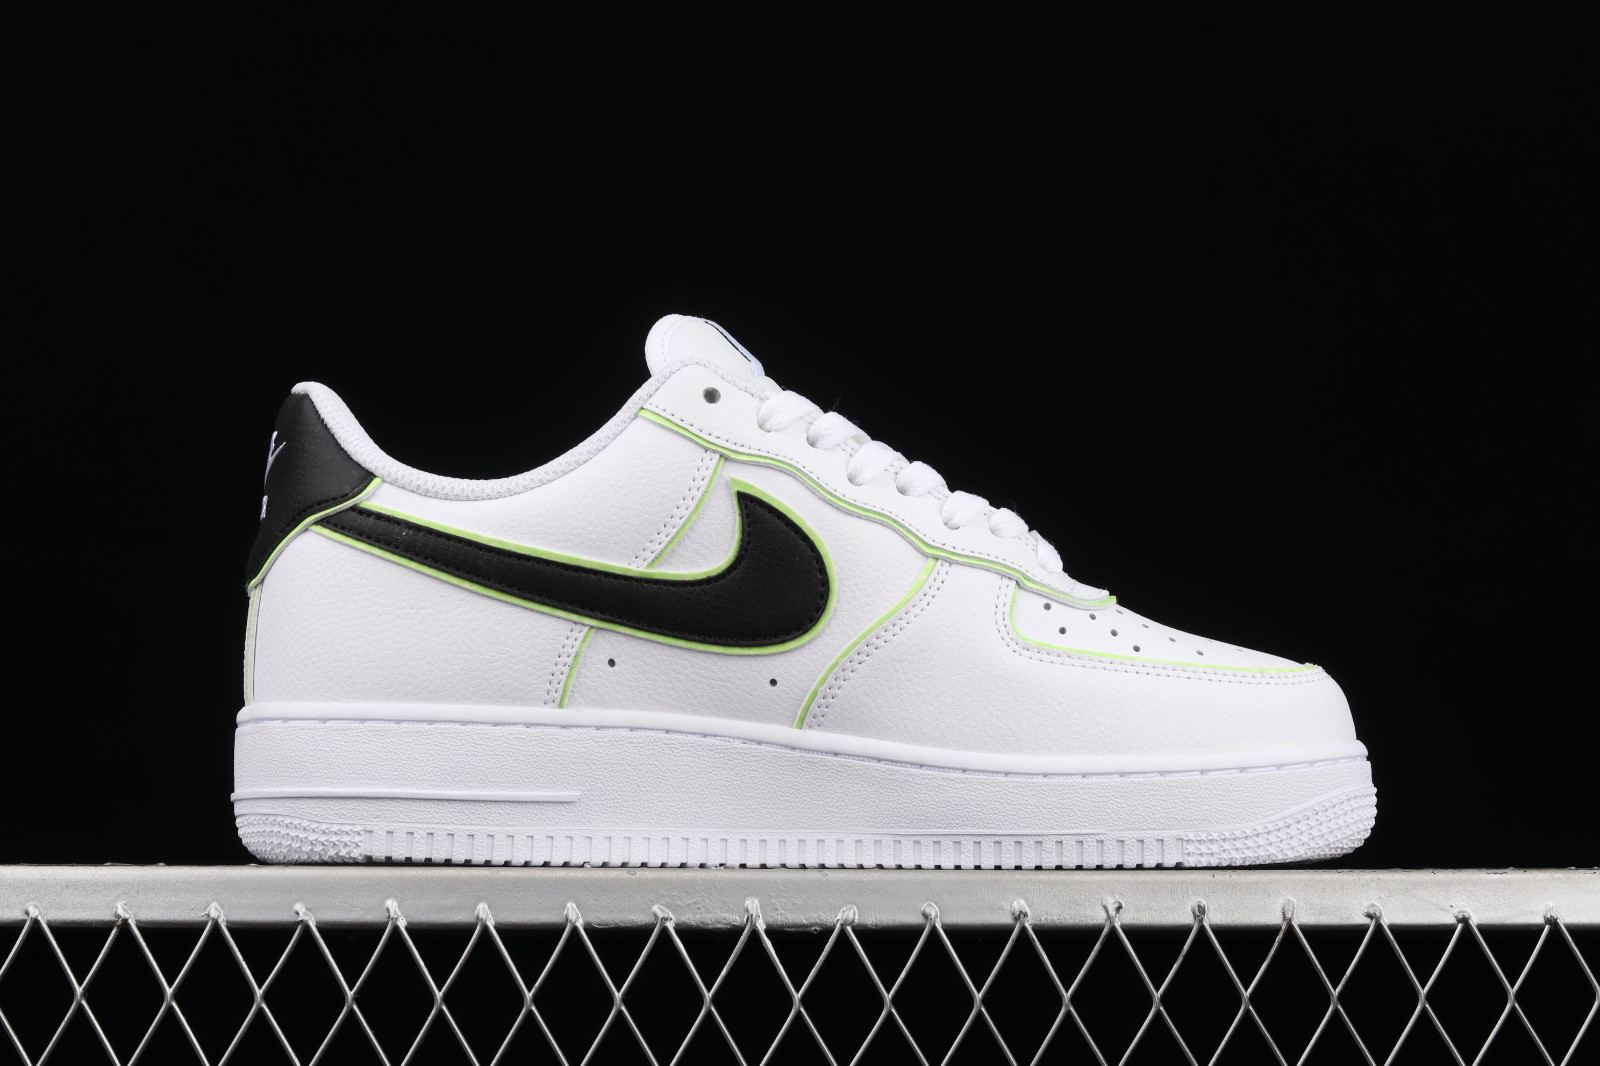 Ariss-euShops 304 - Force 1 07 Low White Green Shoes CW2288 - nike air skylon 2 outfit mens boots shoes